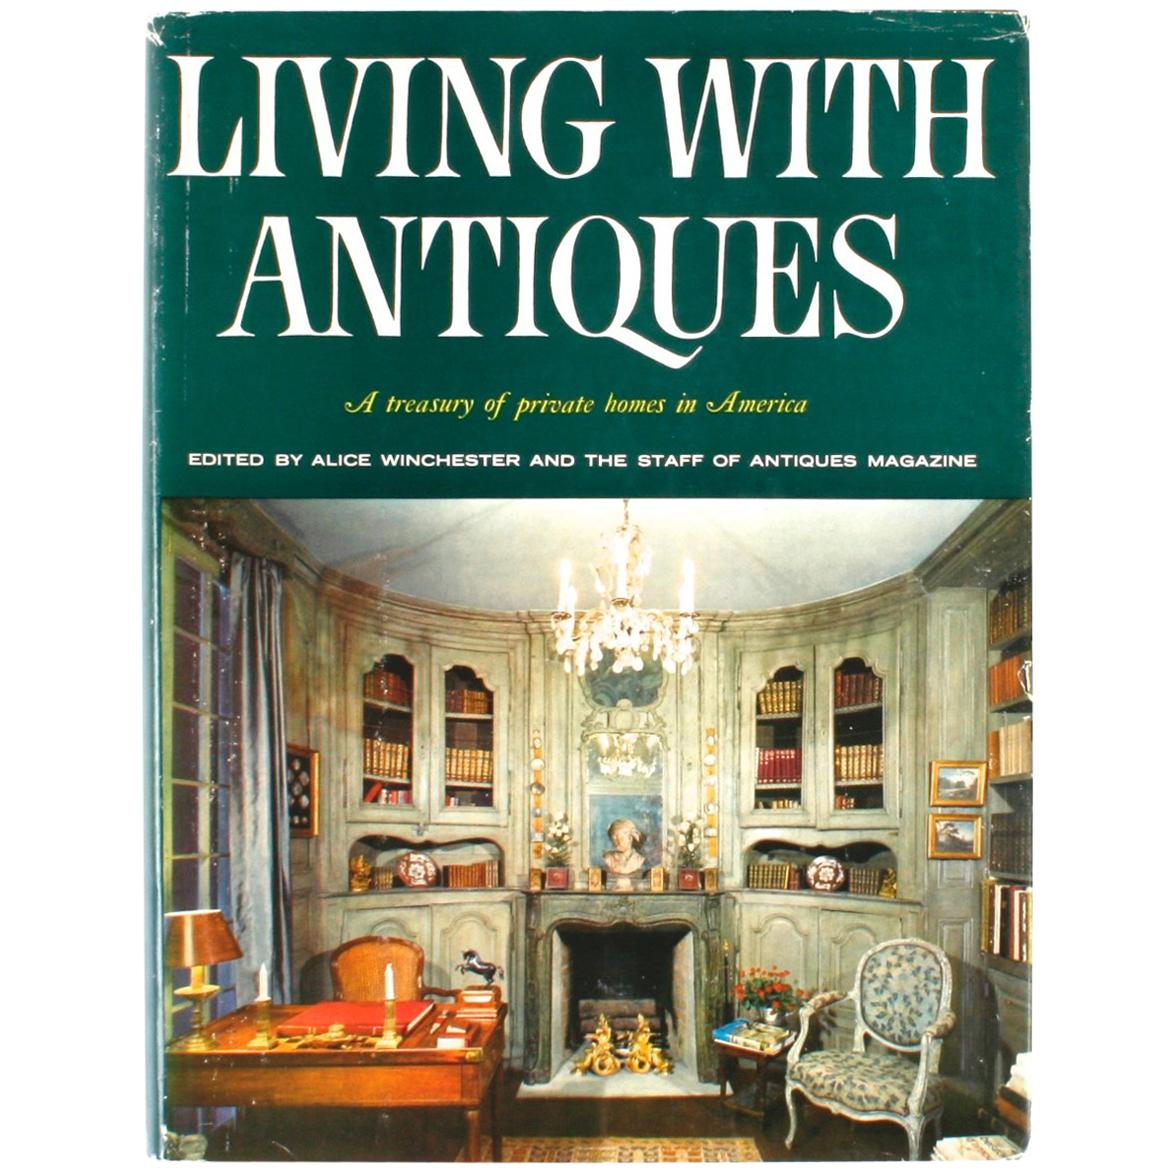 "Living With Antiques, A Treasury of Private Homes in America", Book